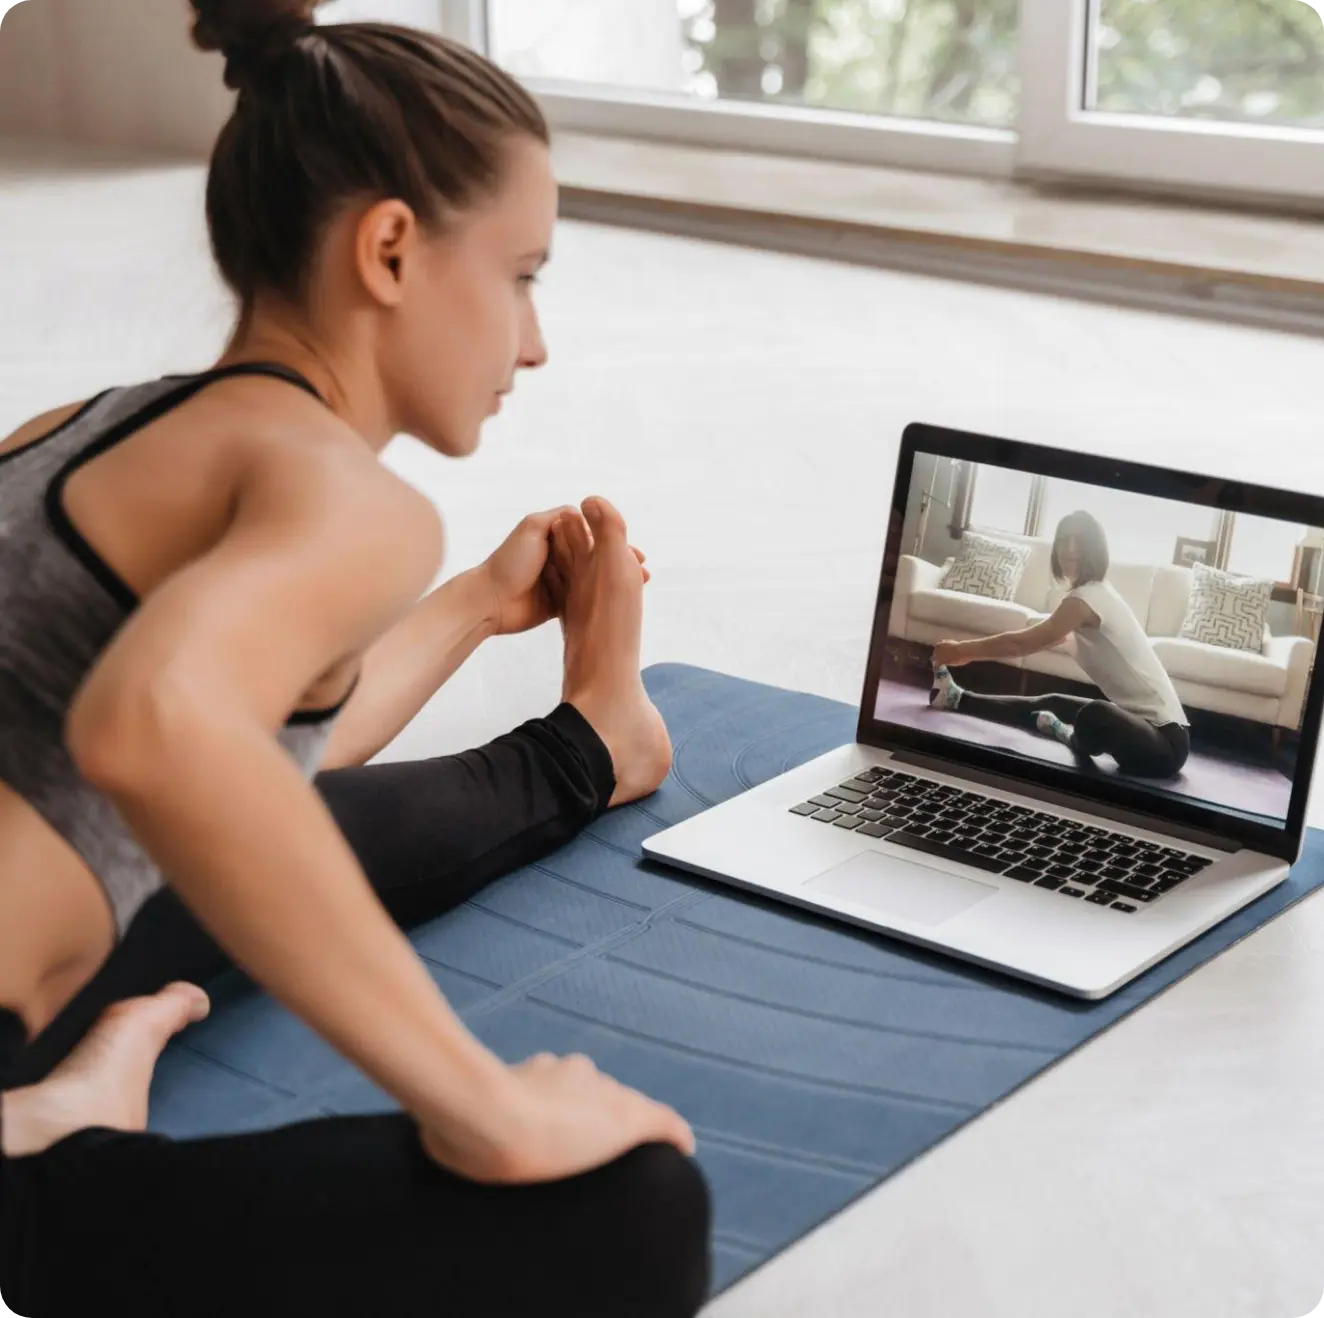 Yoga studio software with video-on-demand to connect with customers